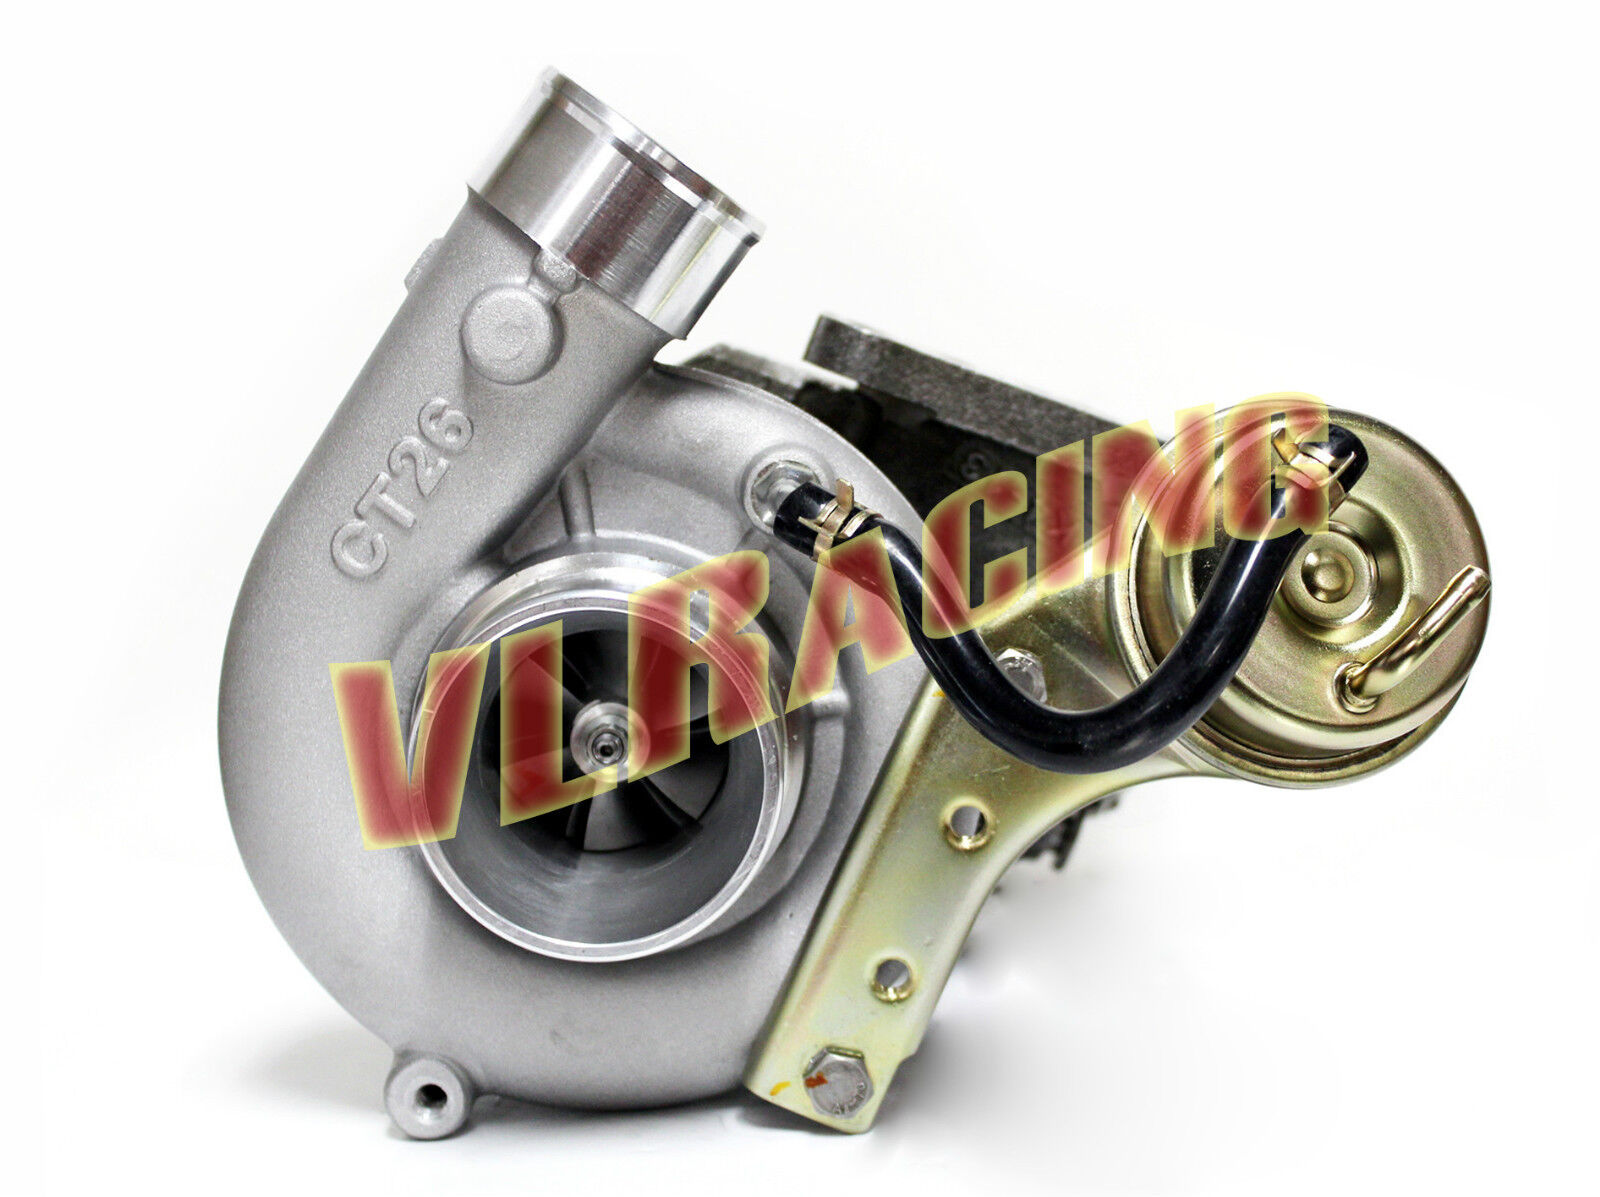 MR2 3SGTE Bolt On Upgrade CT26 Turbo Charger OEM Replacement 16G SW20 6 blades